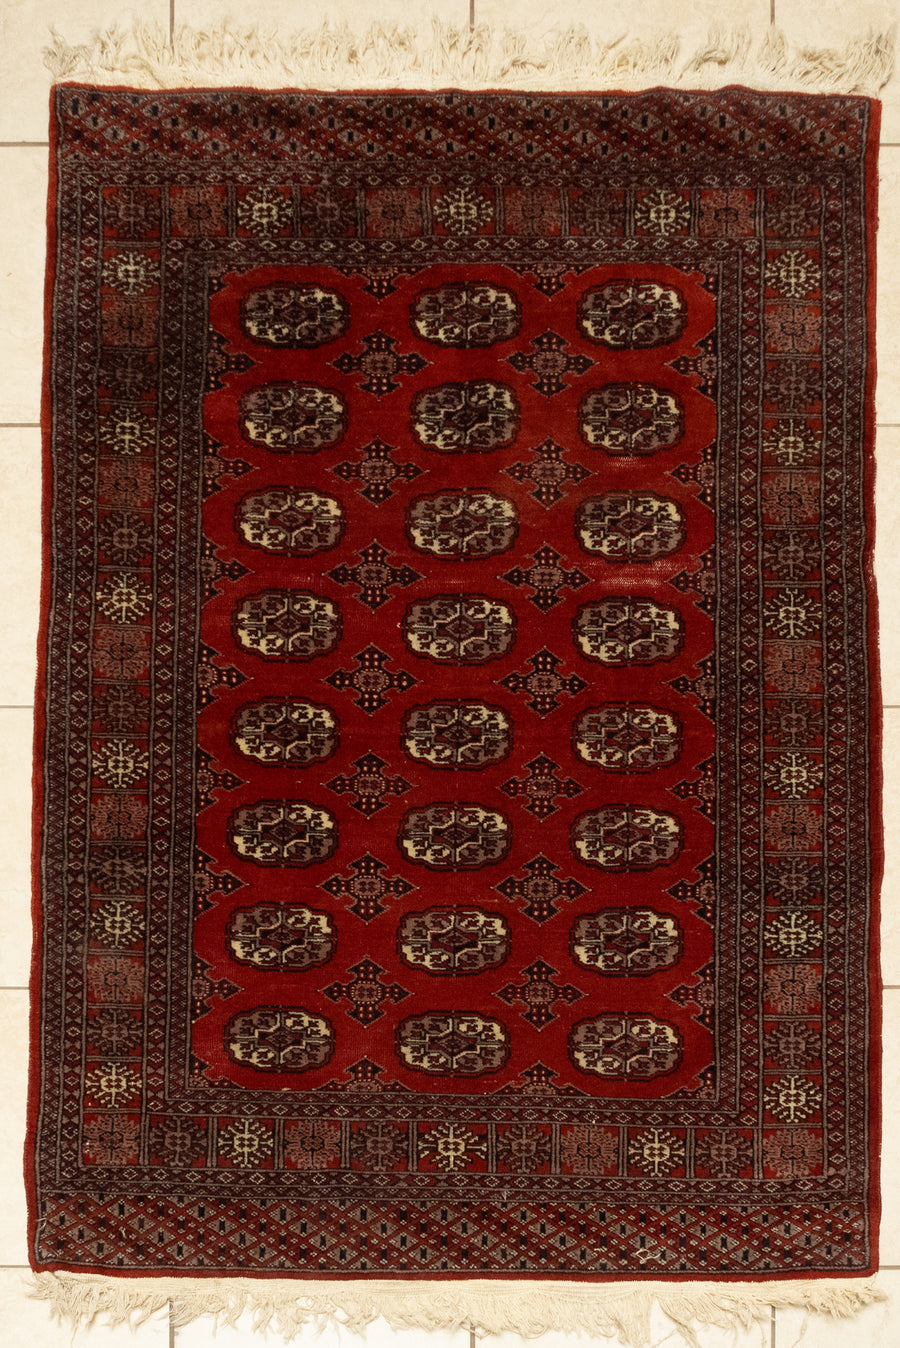 Hand-Knotted Wool Bokhara Rug 6'5" x 4'1"